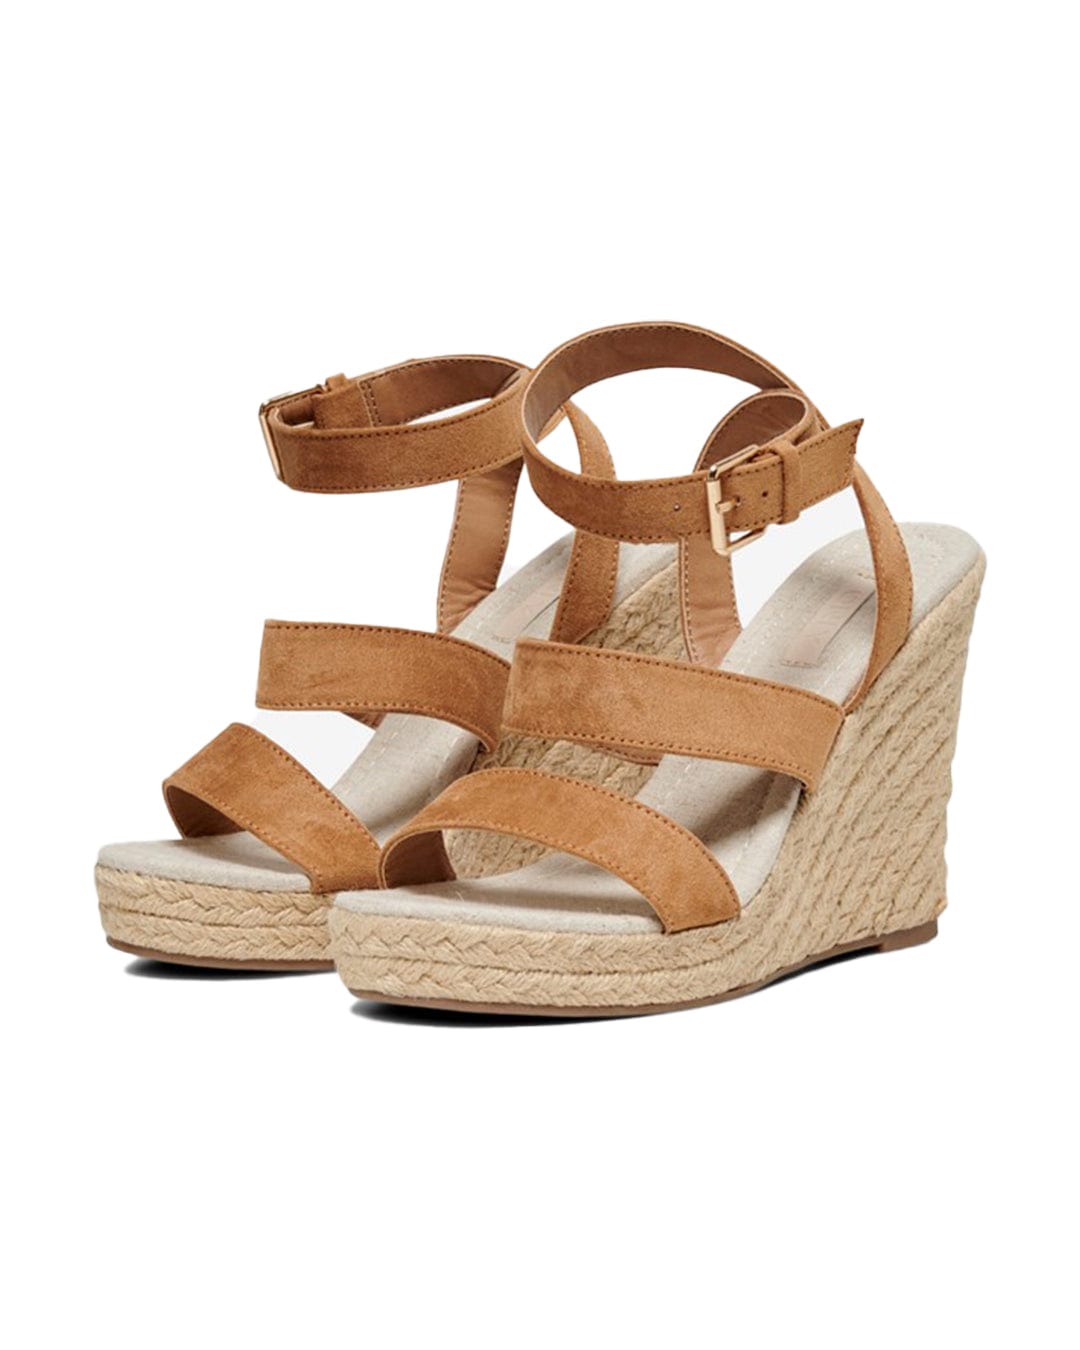 Only Shoes Only Amelia Brown Wedge Sandals